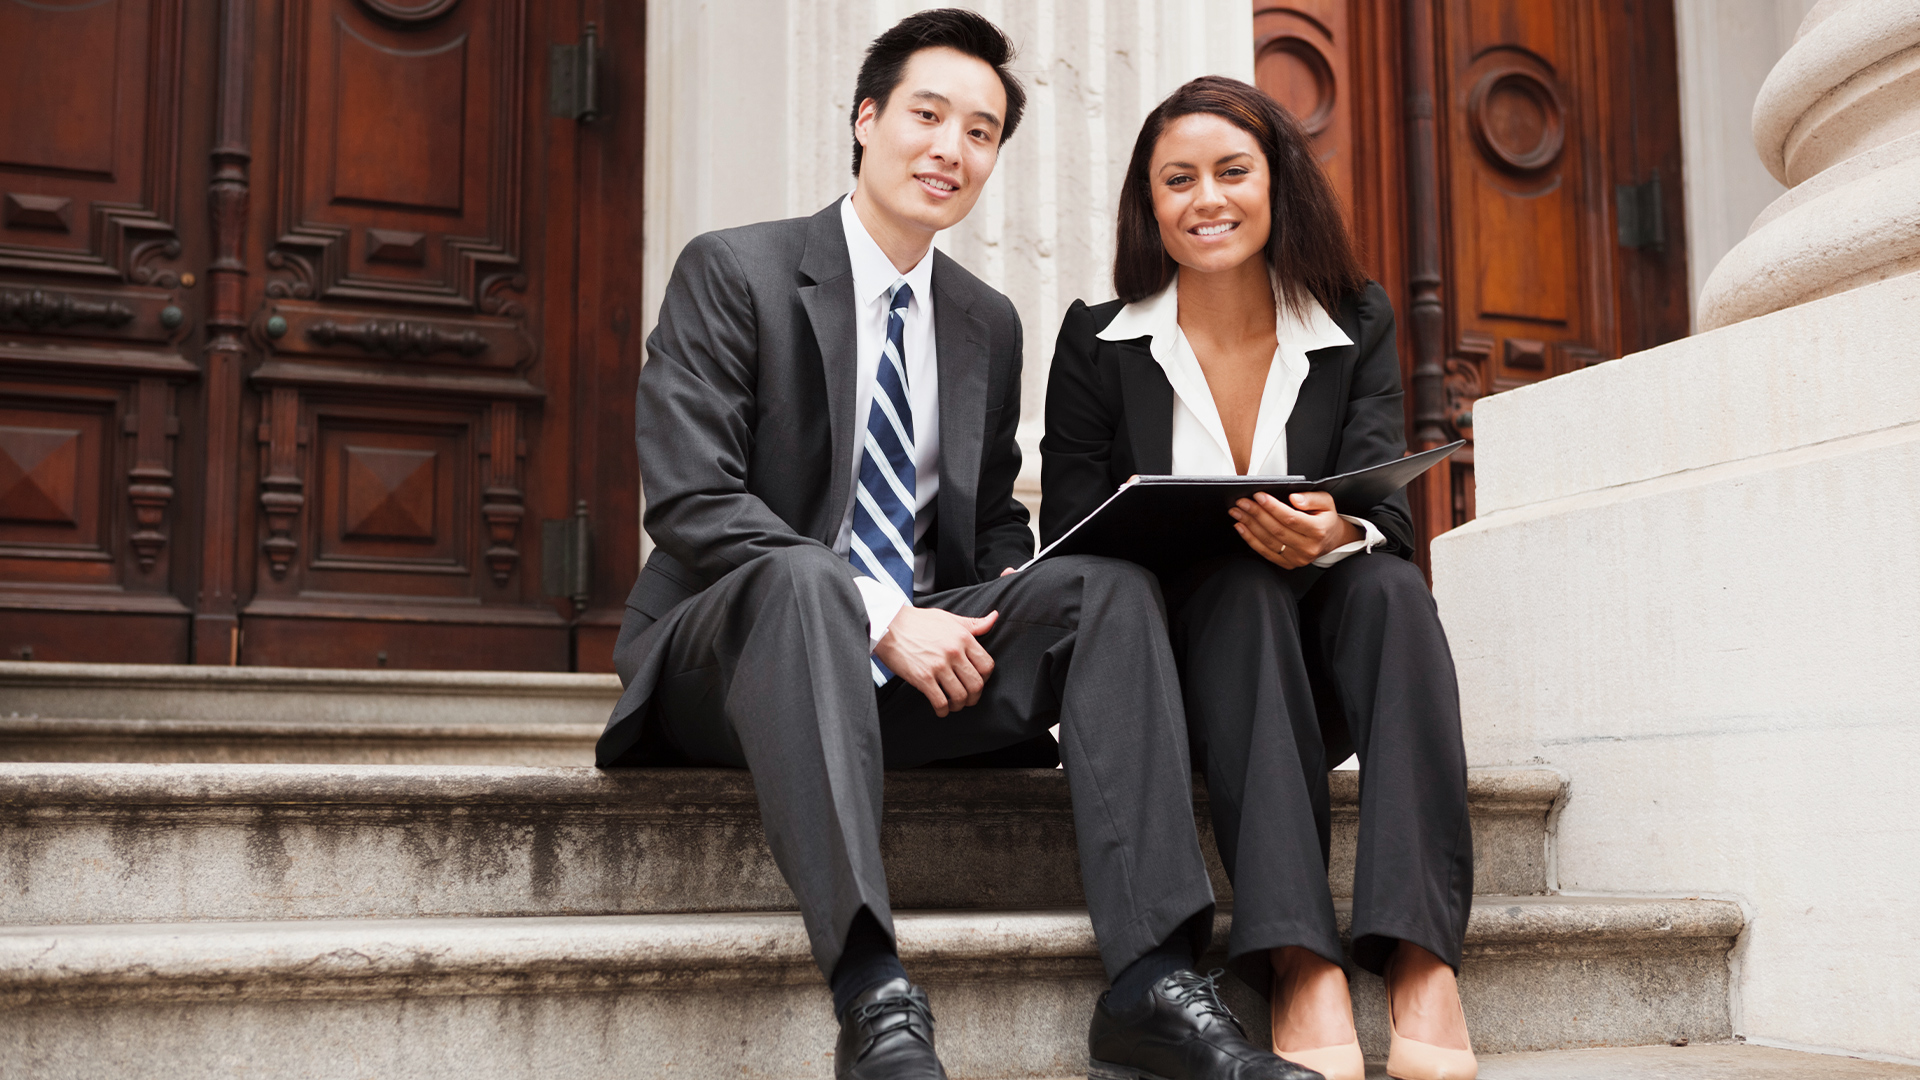 Businessman and business woman smiling and sitting outside on steps of legal building